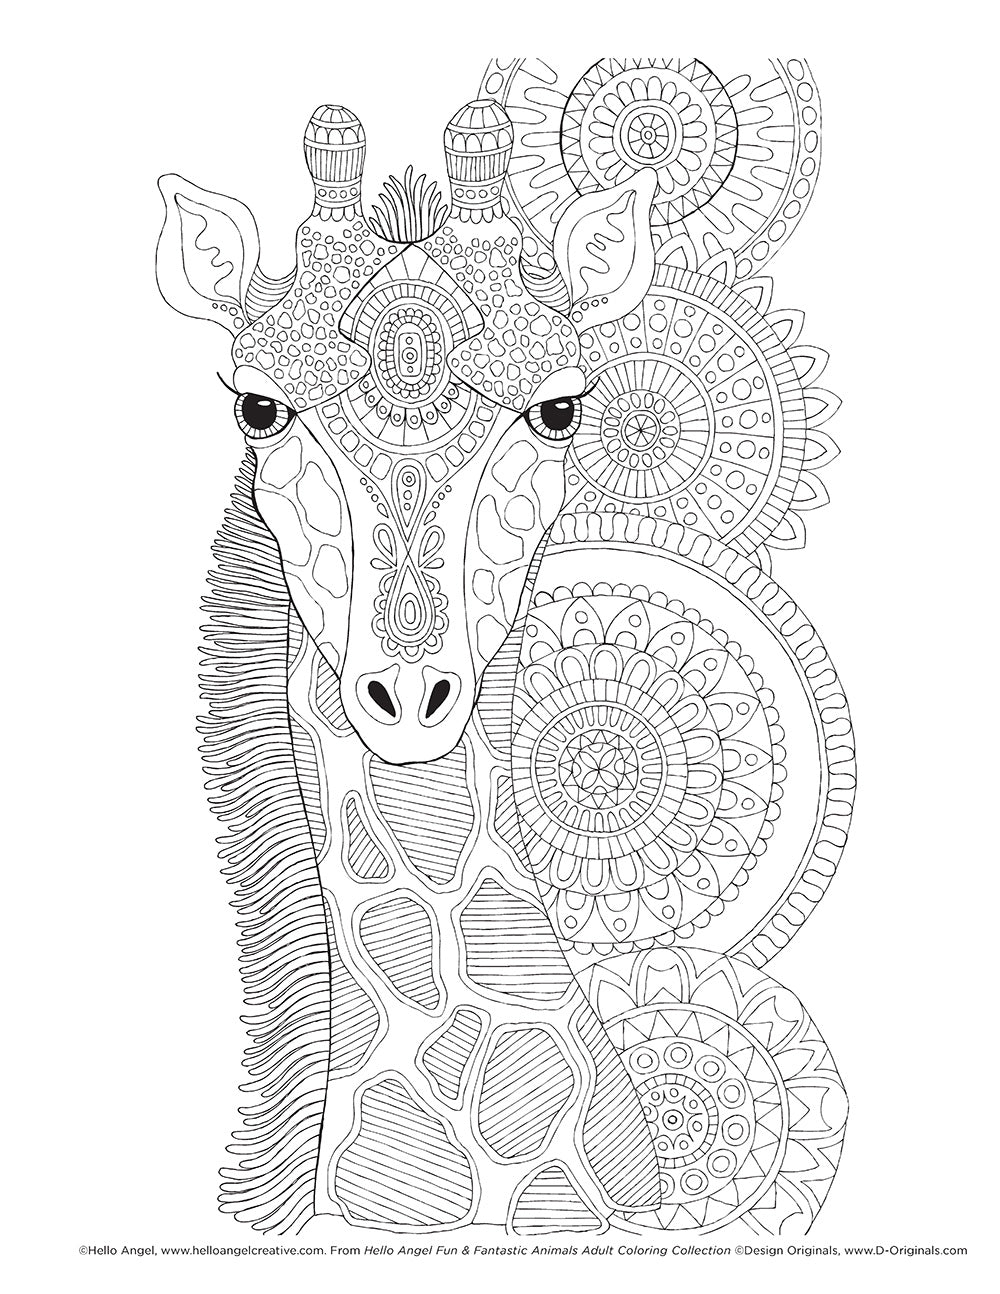 Hello Angel Fun & Fantastic Animals Adult Coloring Collection